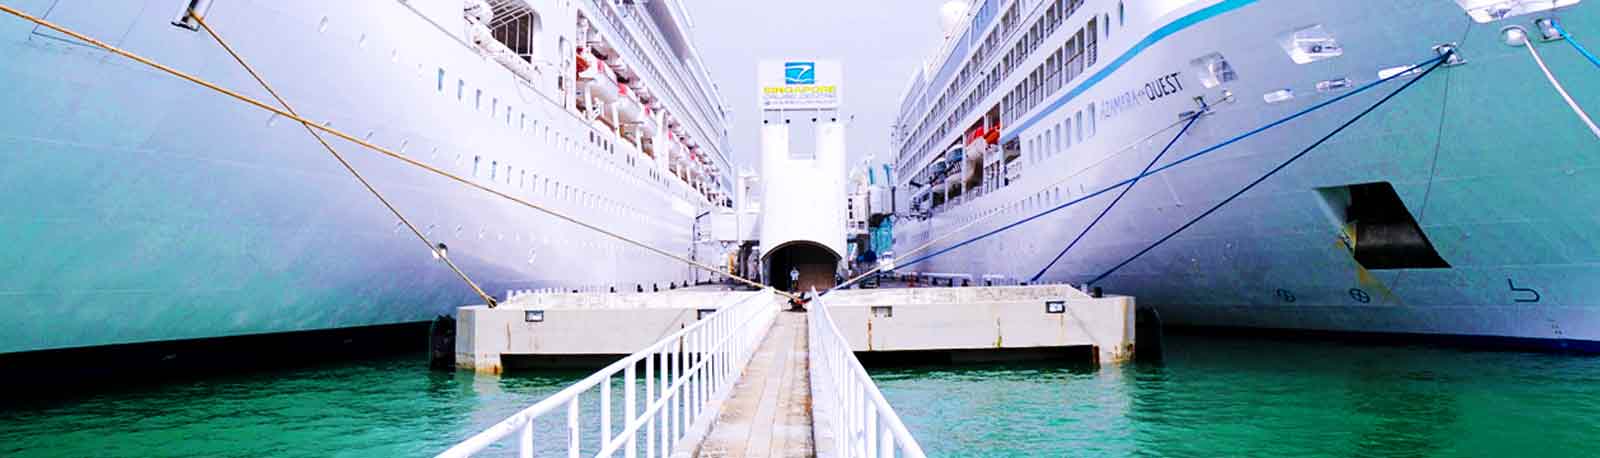 DFS (Departure Hall) - Singapore Cruise Centre (ferry & cruise)